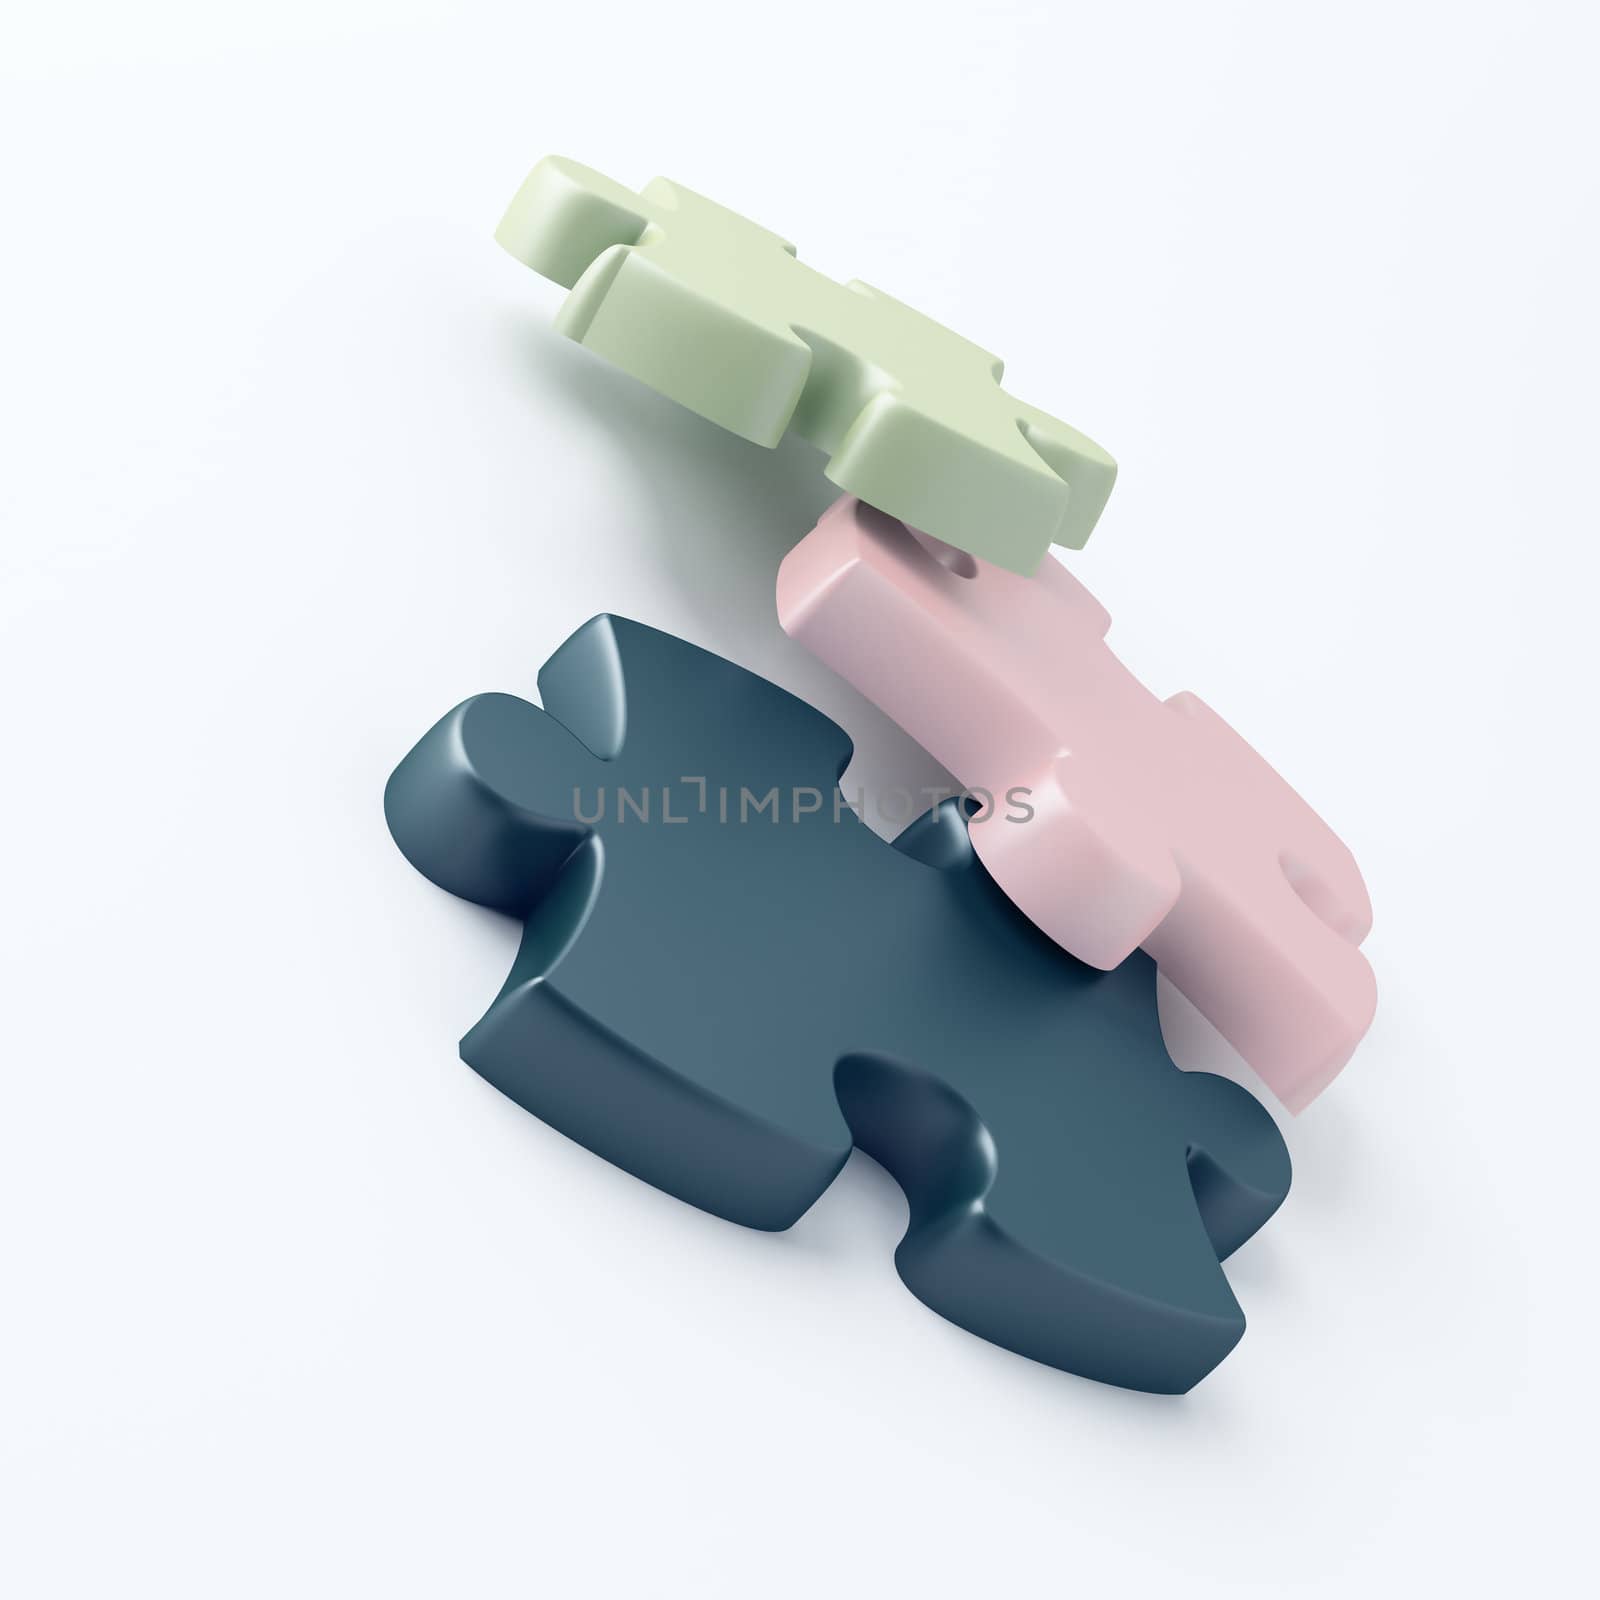 Parts of a puzzle with funny colors on a white background by Serp